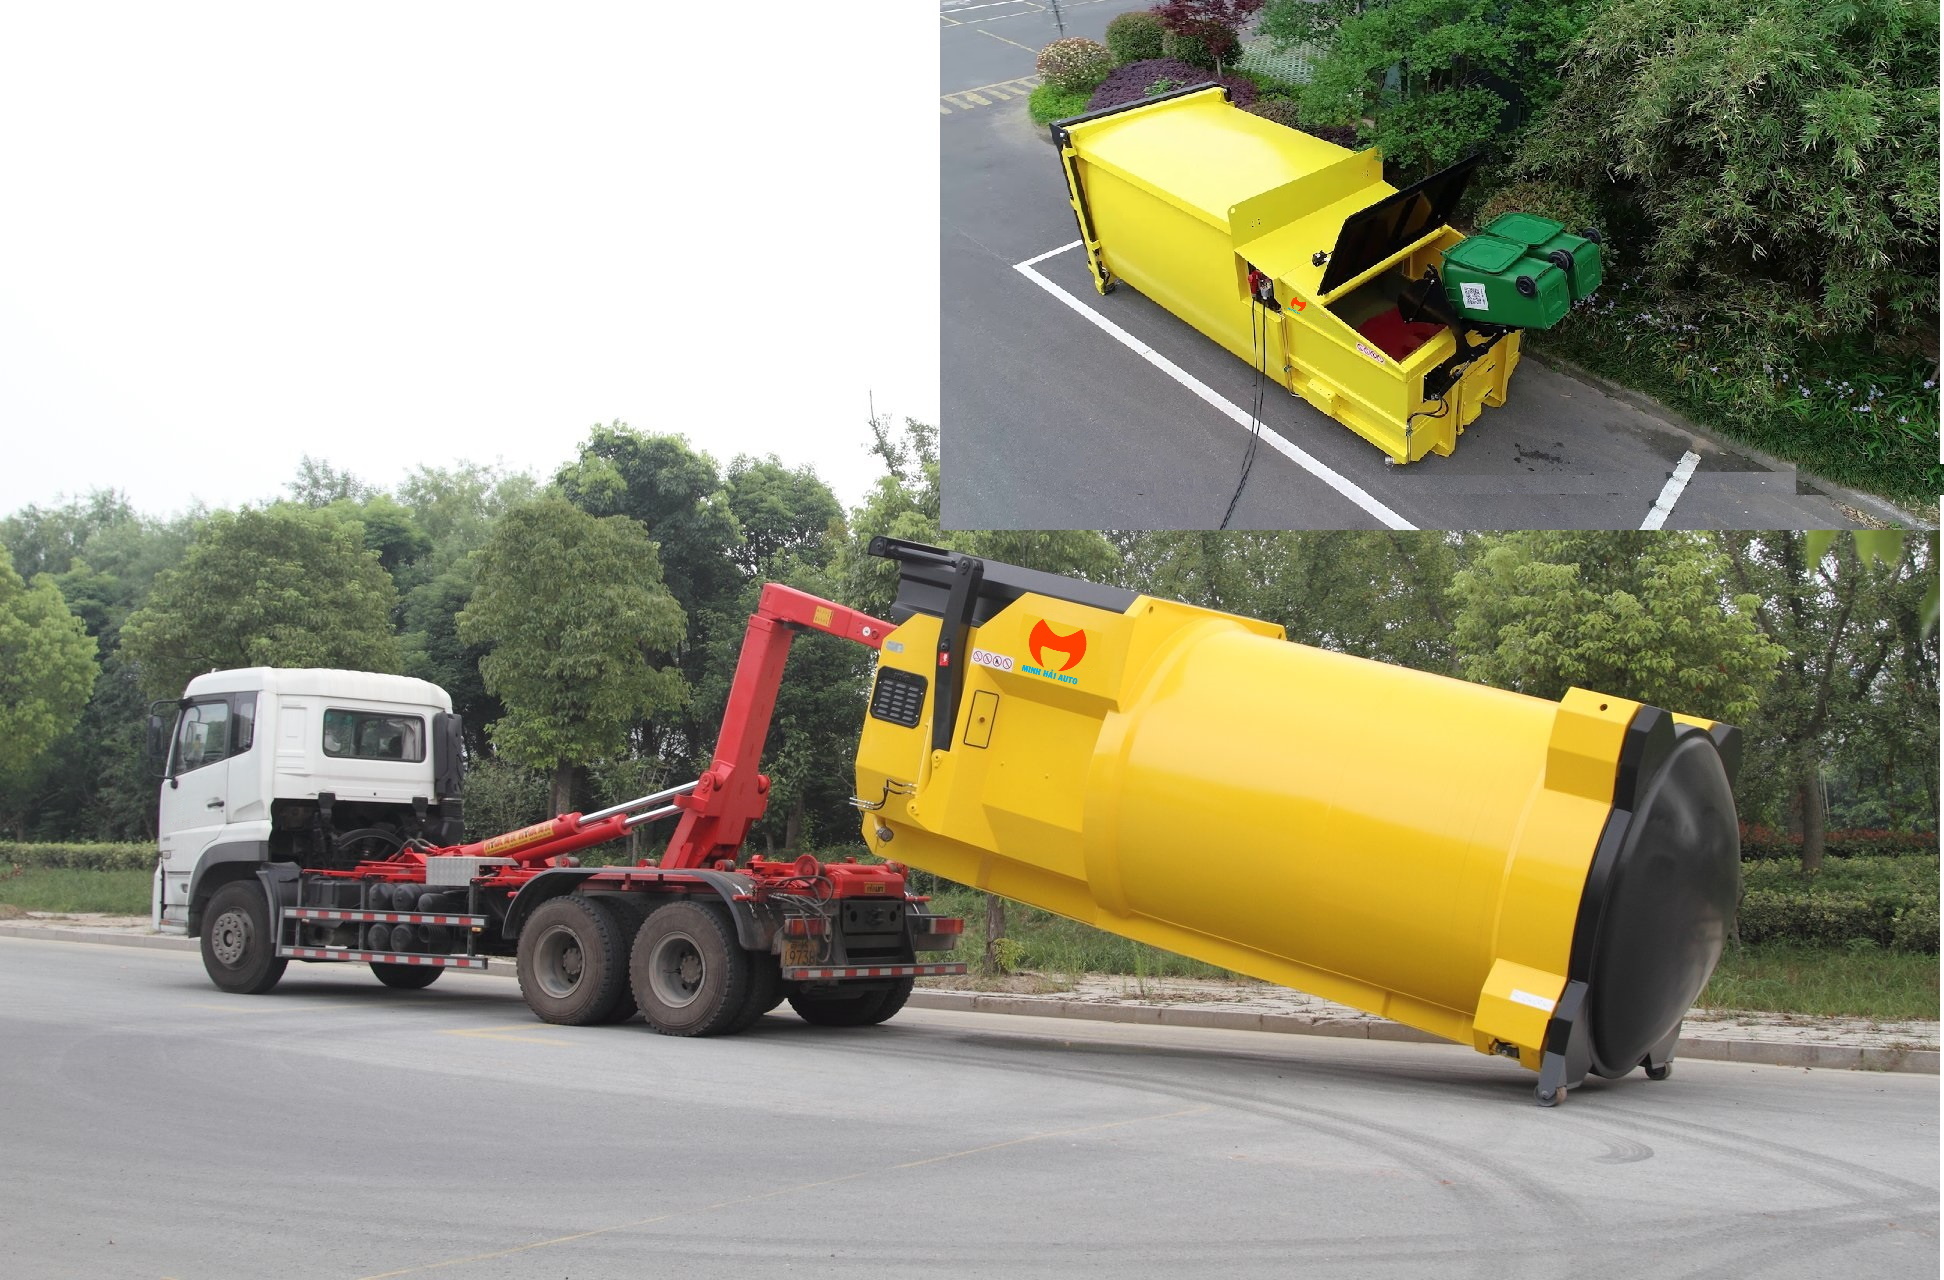 Mobile garbage compactor station: for small area, flexible, low investament